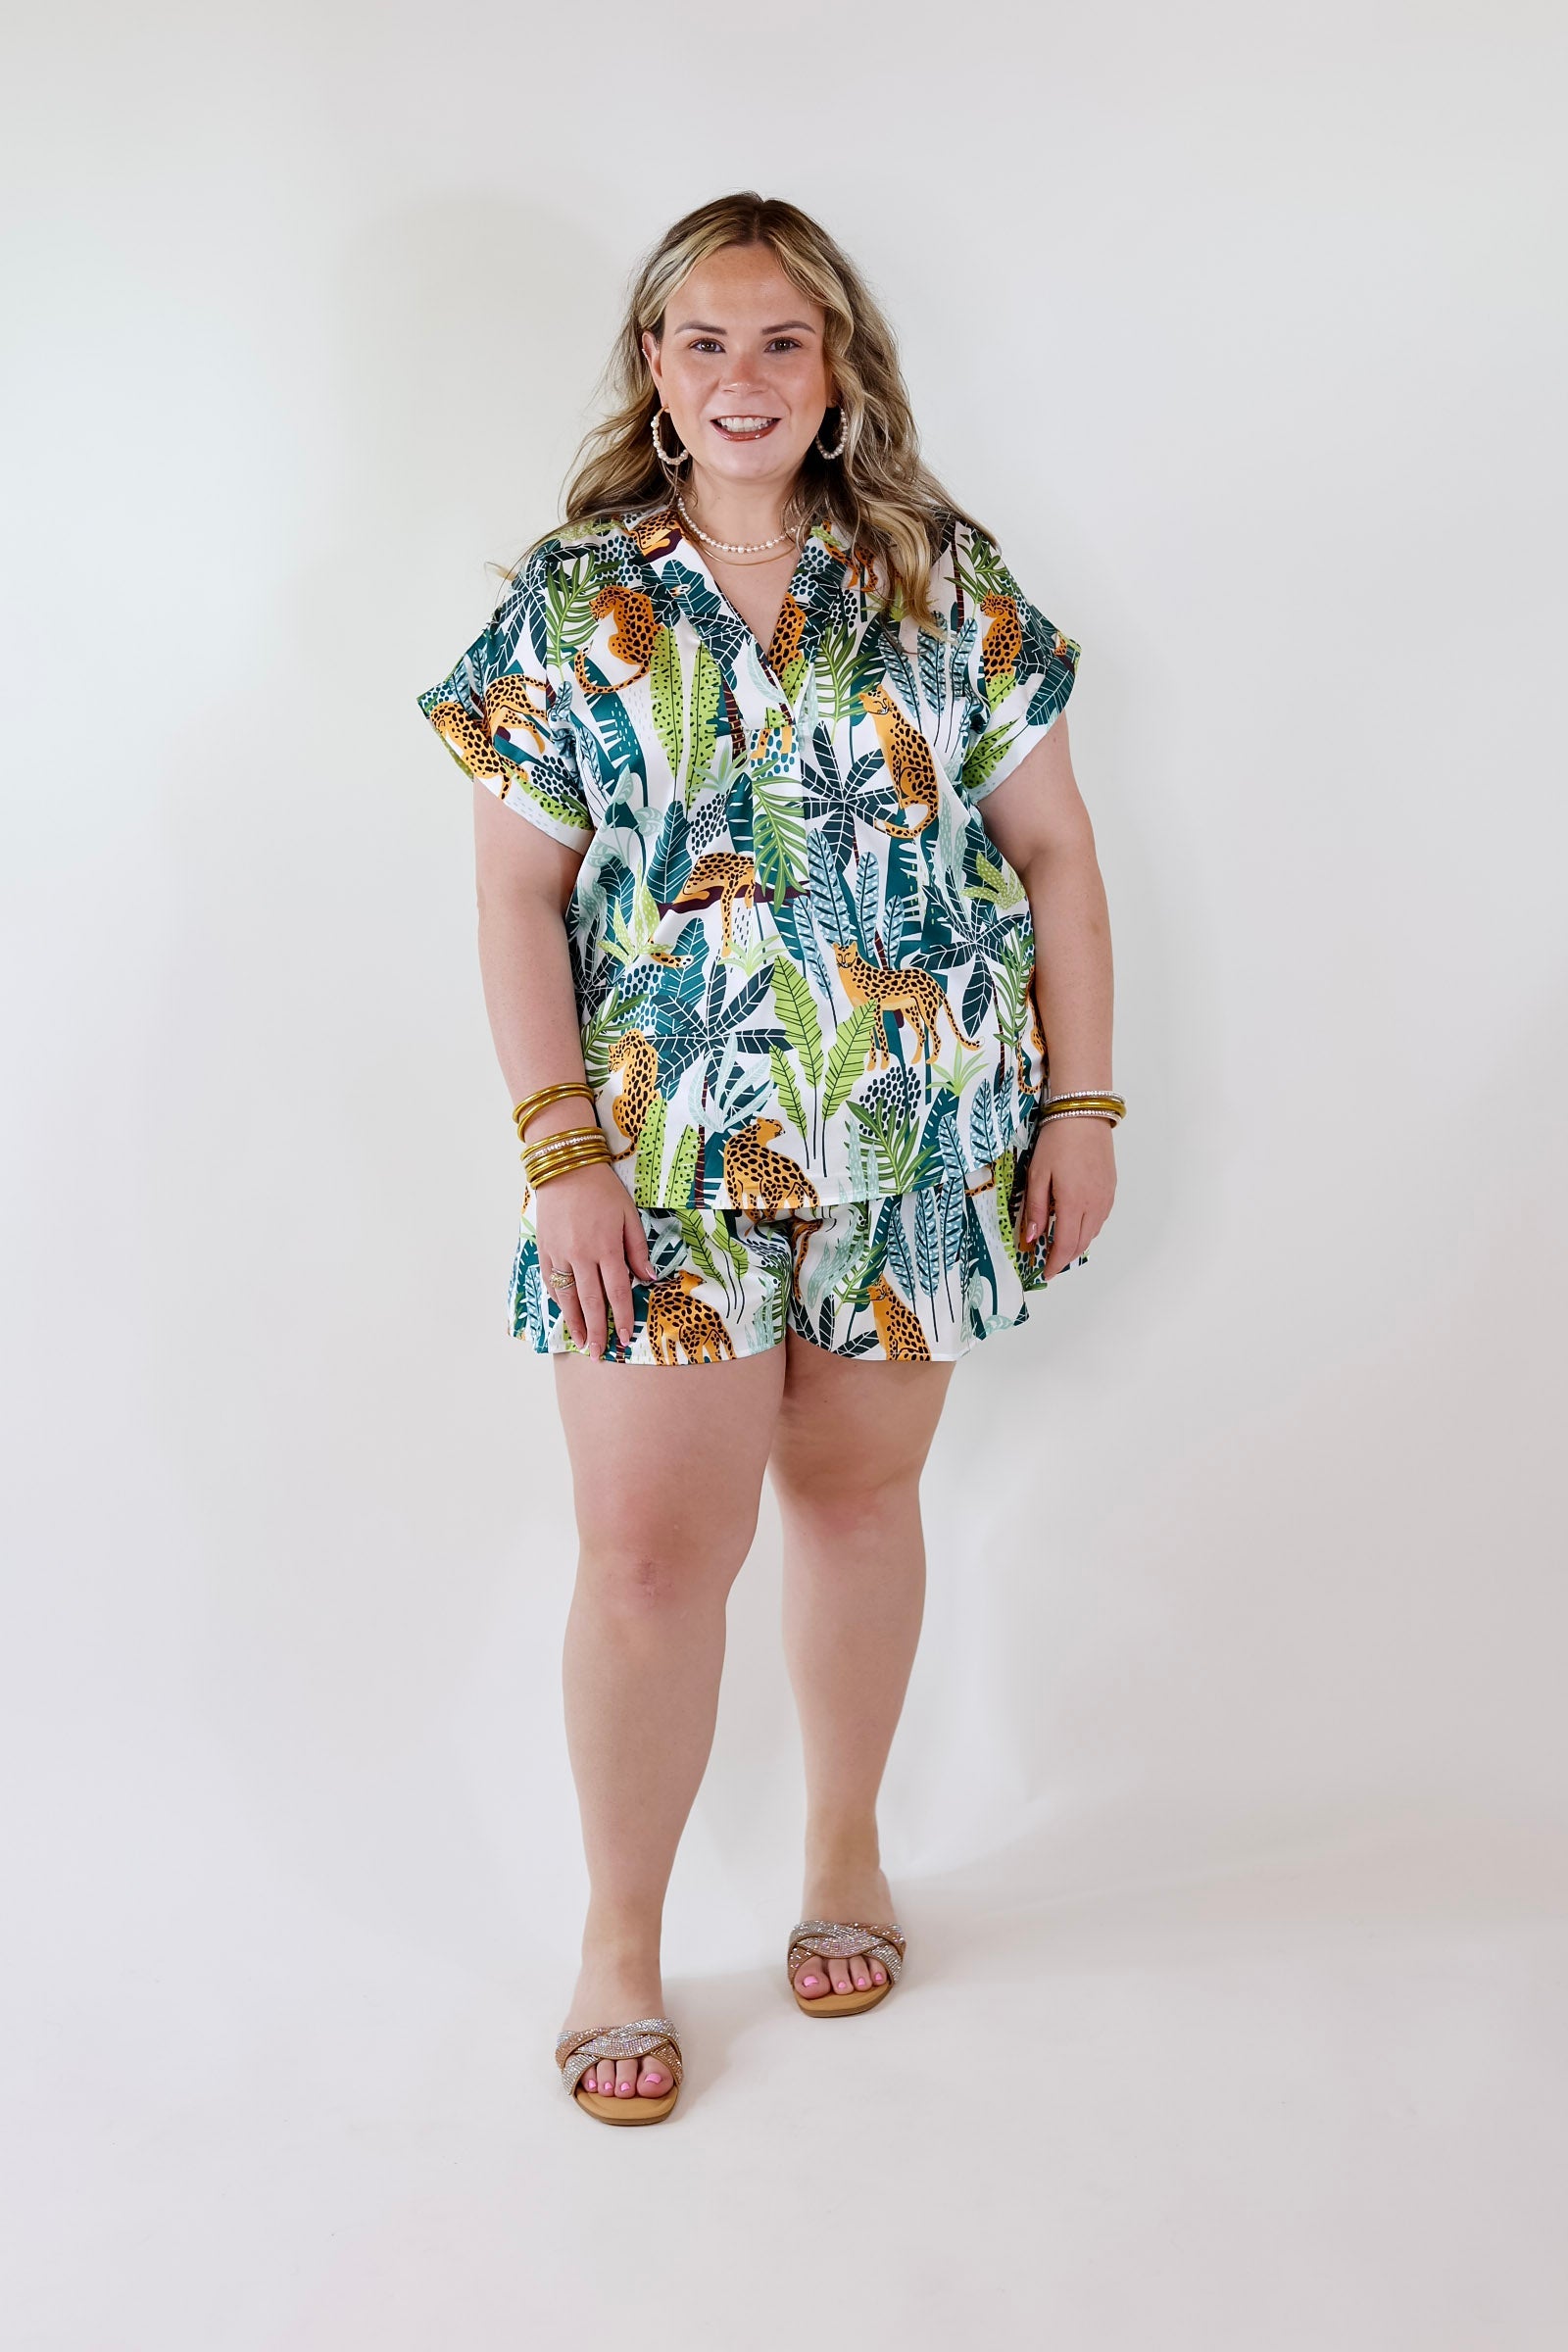 Center of Attention Jungle Print Top in White - Giddy Up Glamour Boutique